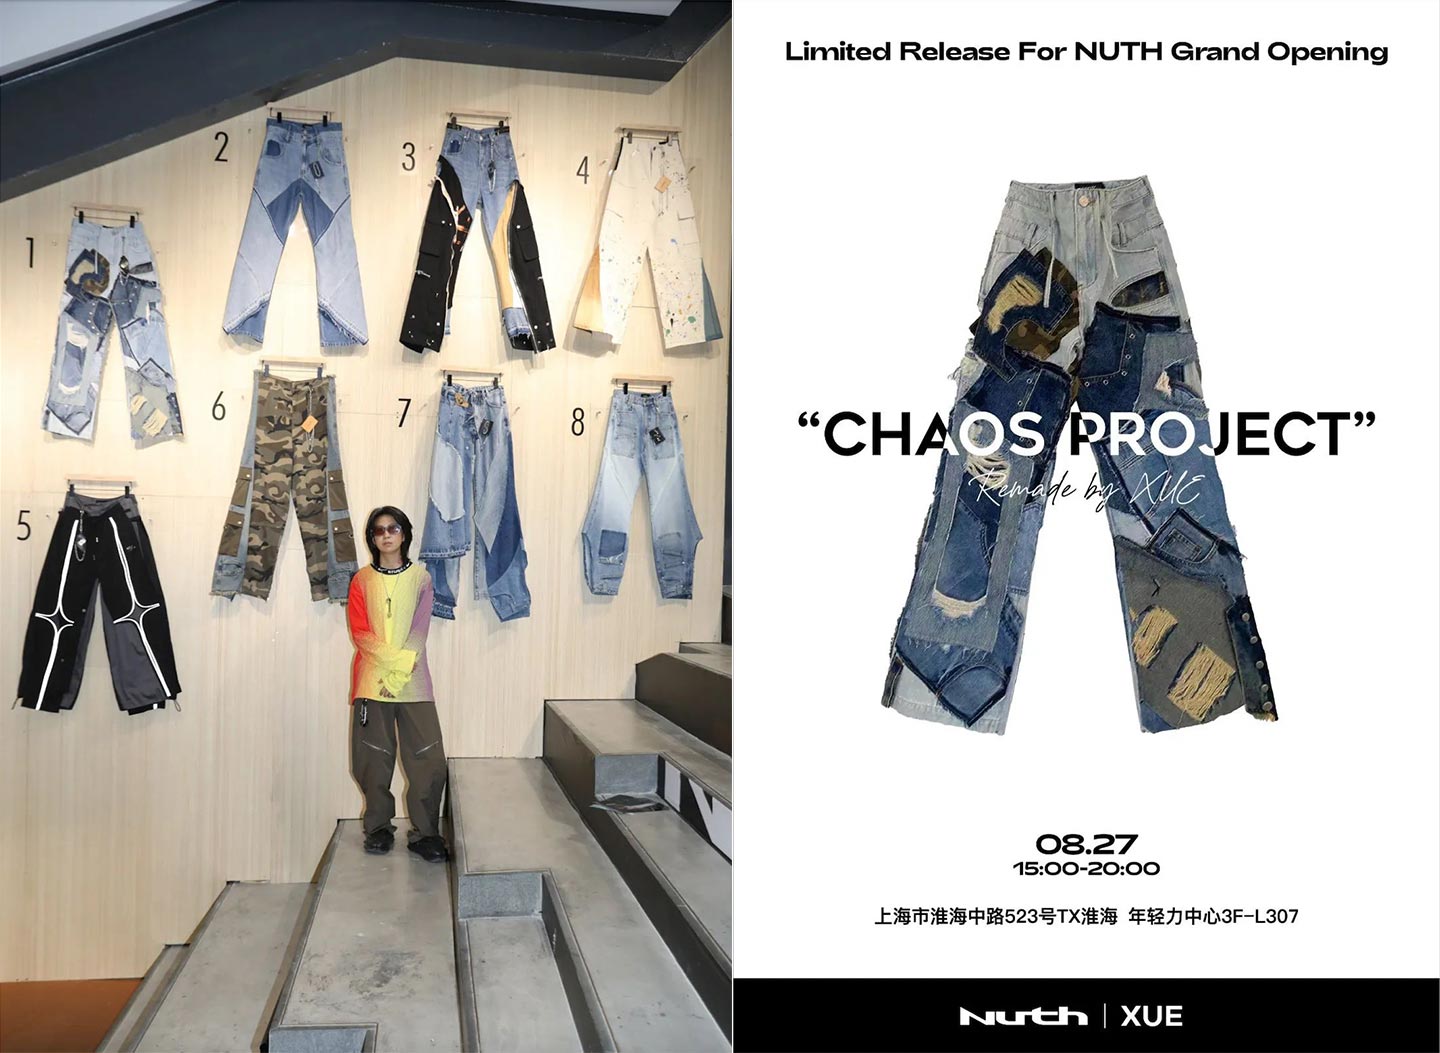 The Shanghai-based denim brand NUTH collaborated with young artist XUE on a collection named "CHAOS PROJECT" at TX Huaihai